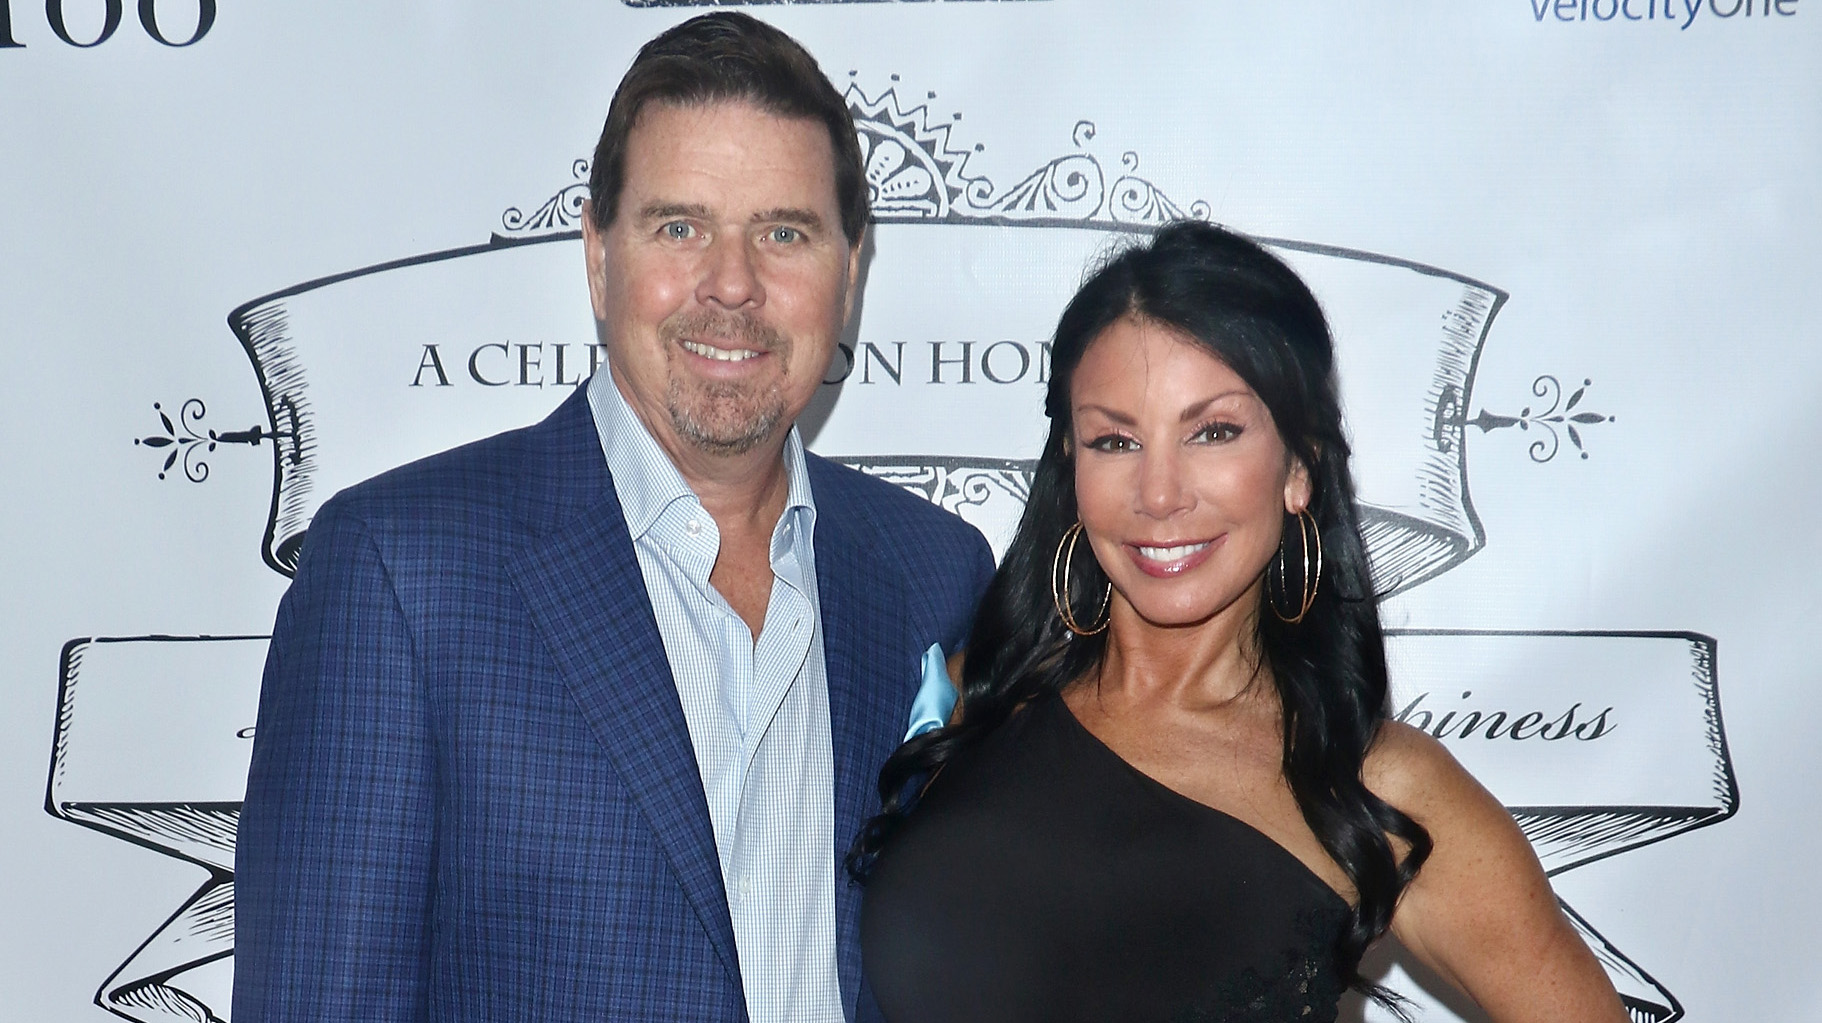 Who Is Danielle Staub Engaged To? Get Details on Her Current Relationship pic